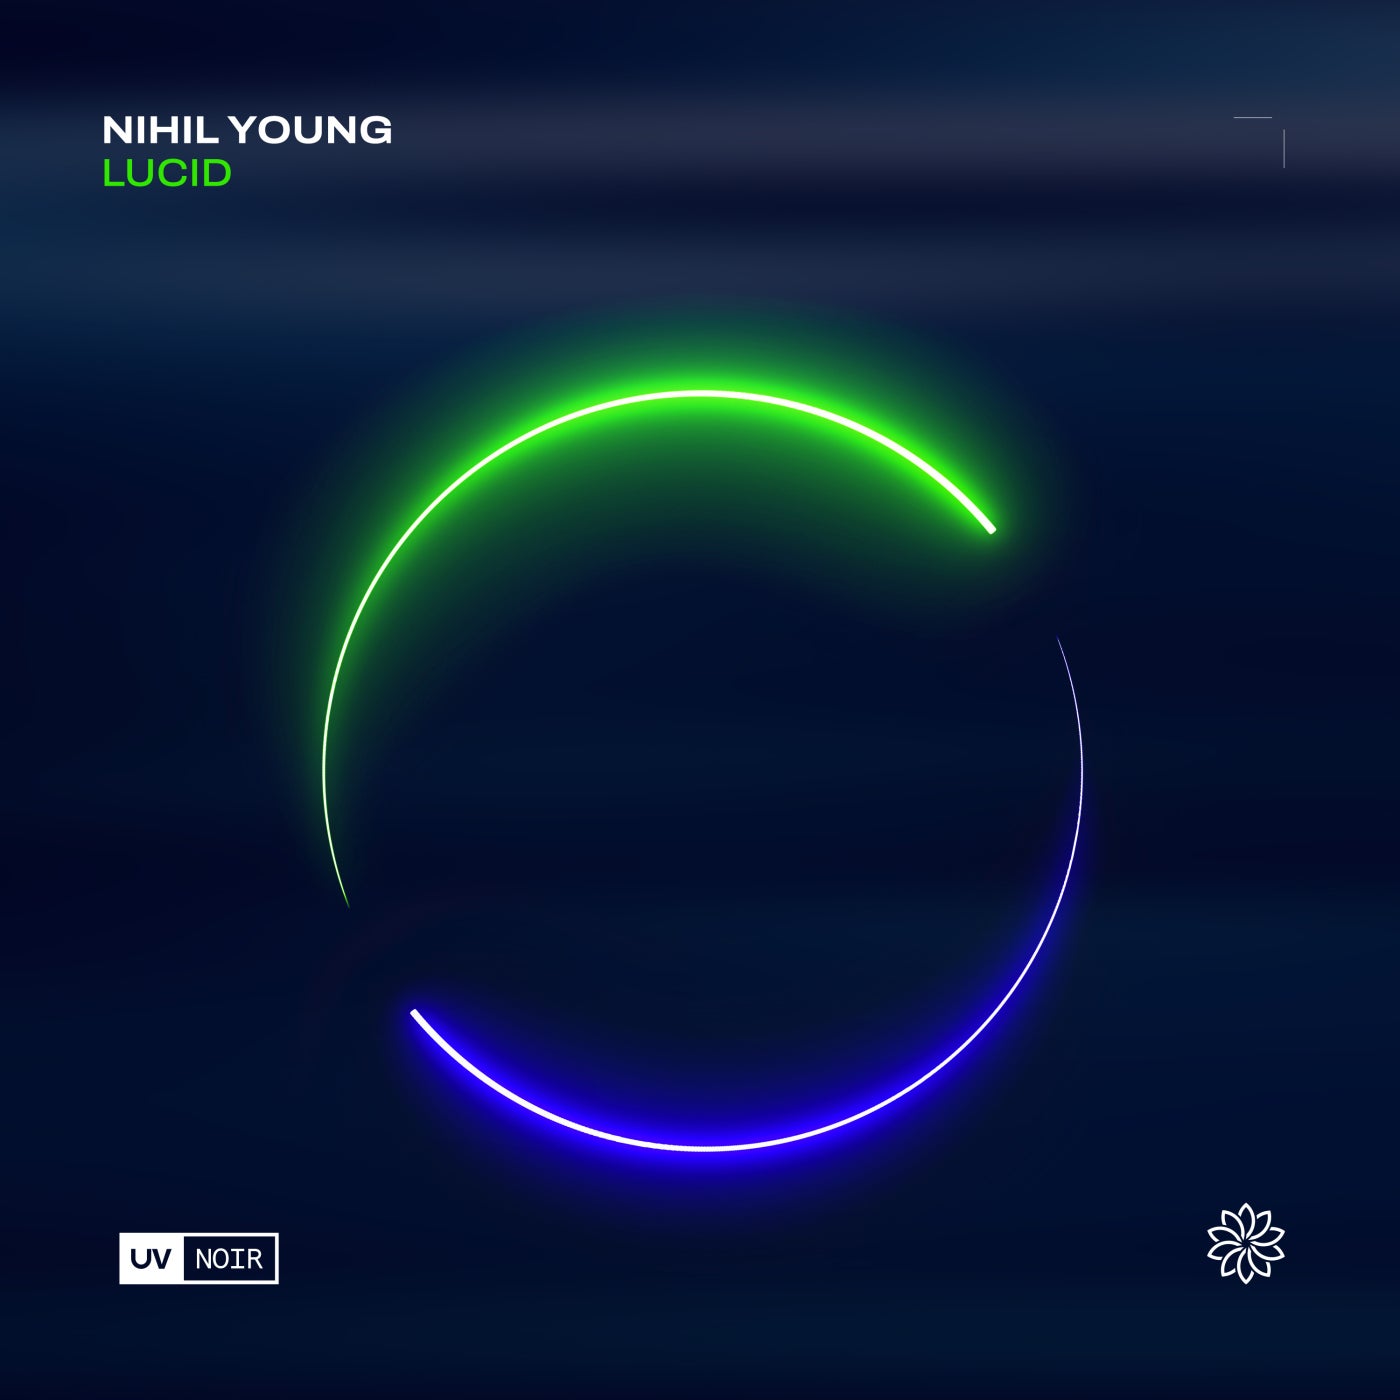 image cover: Nihil Young - Lucid on UV Noir